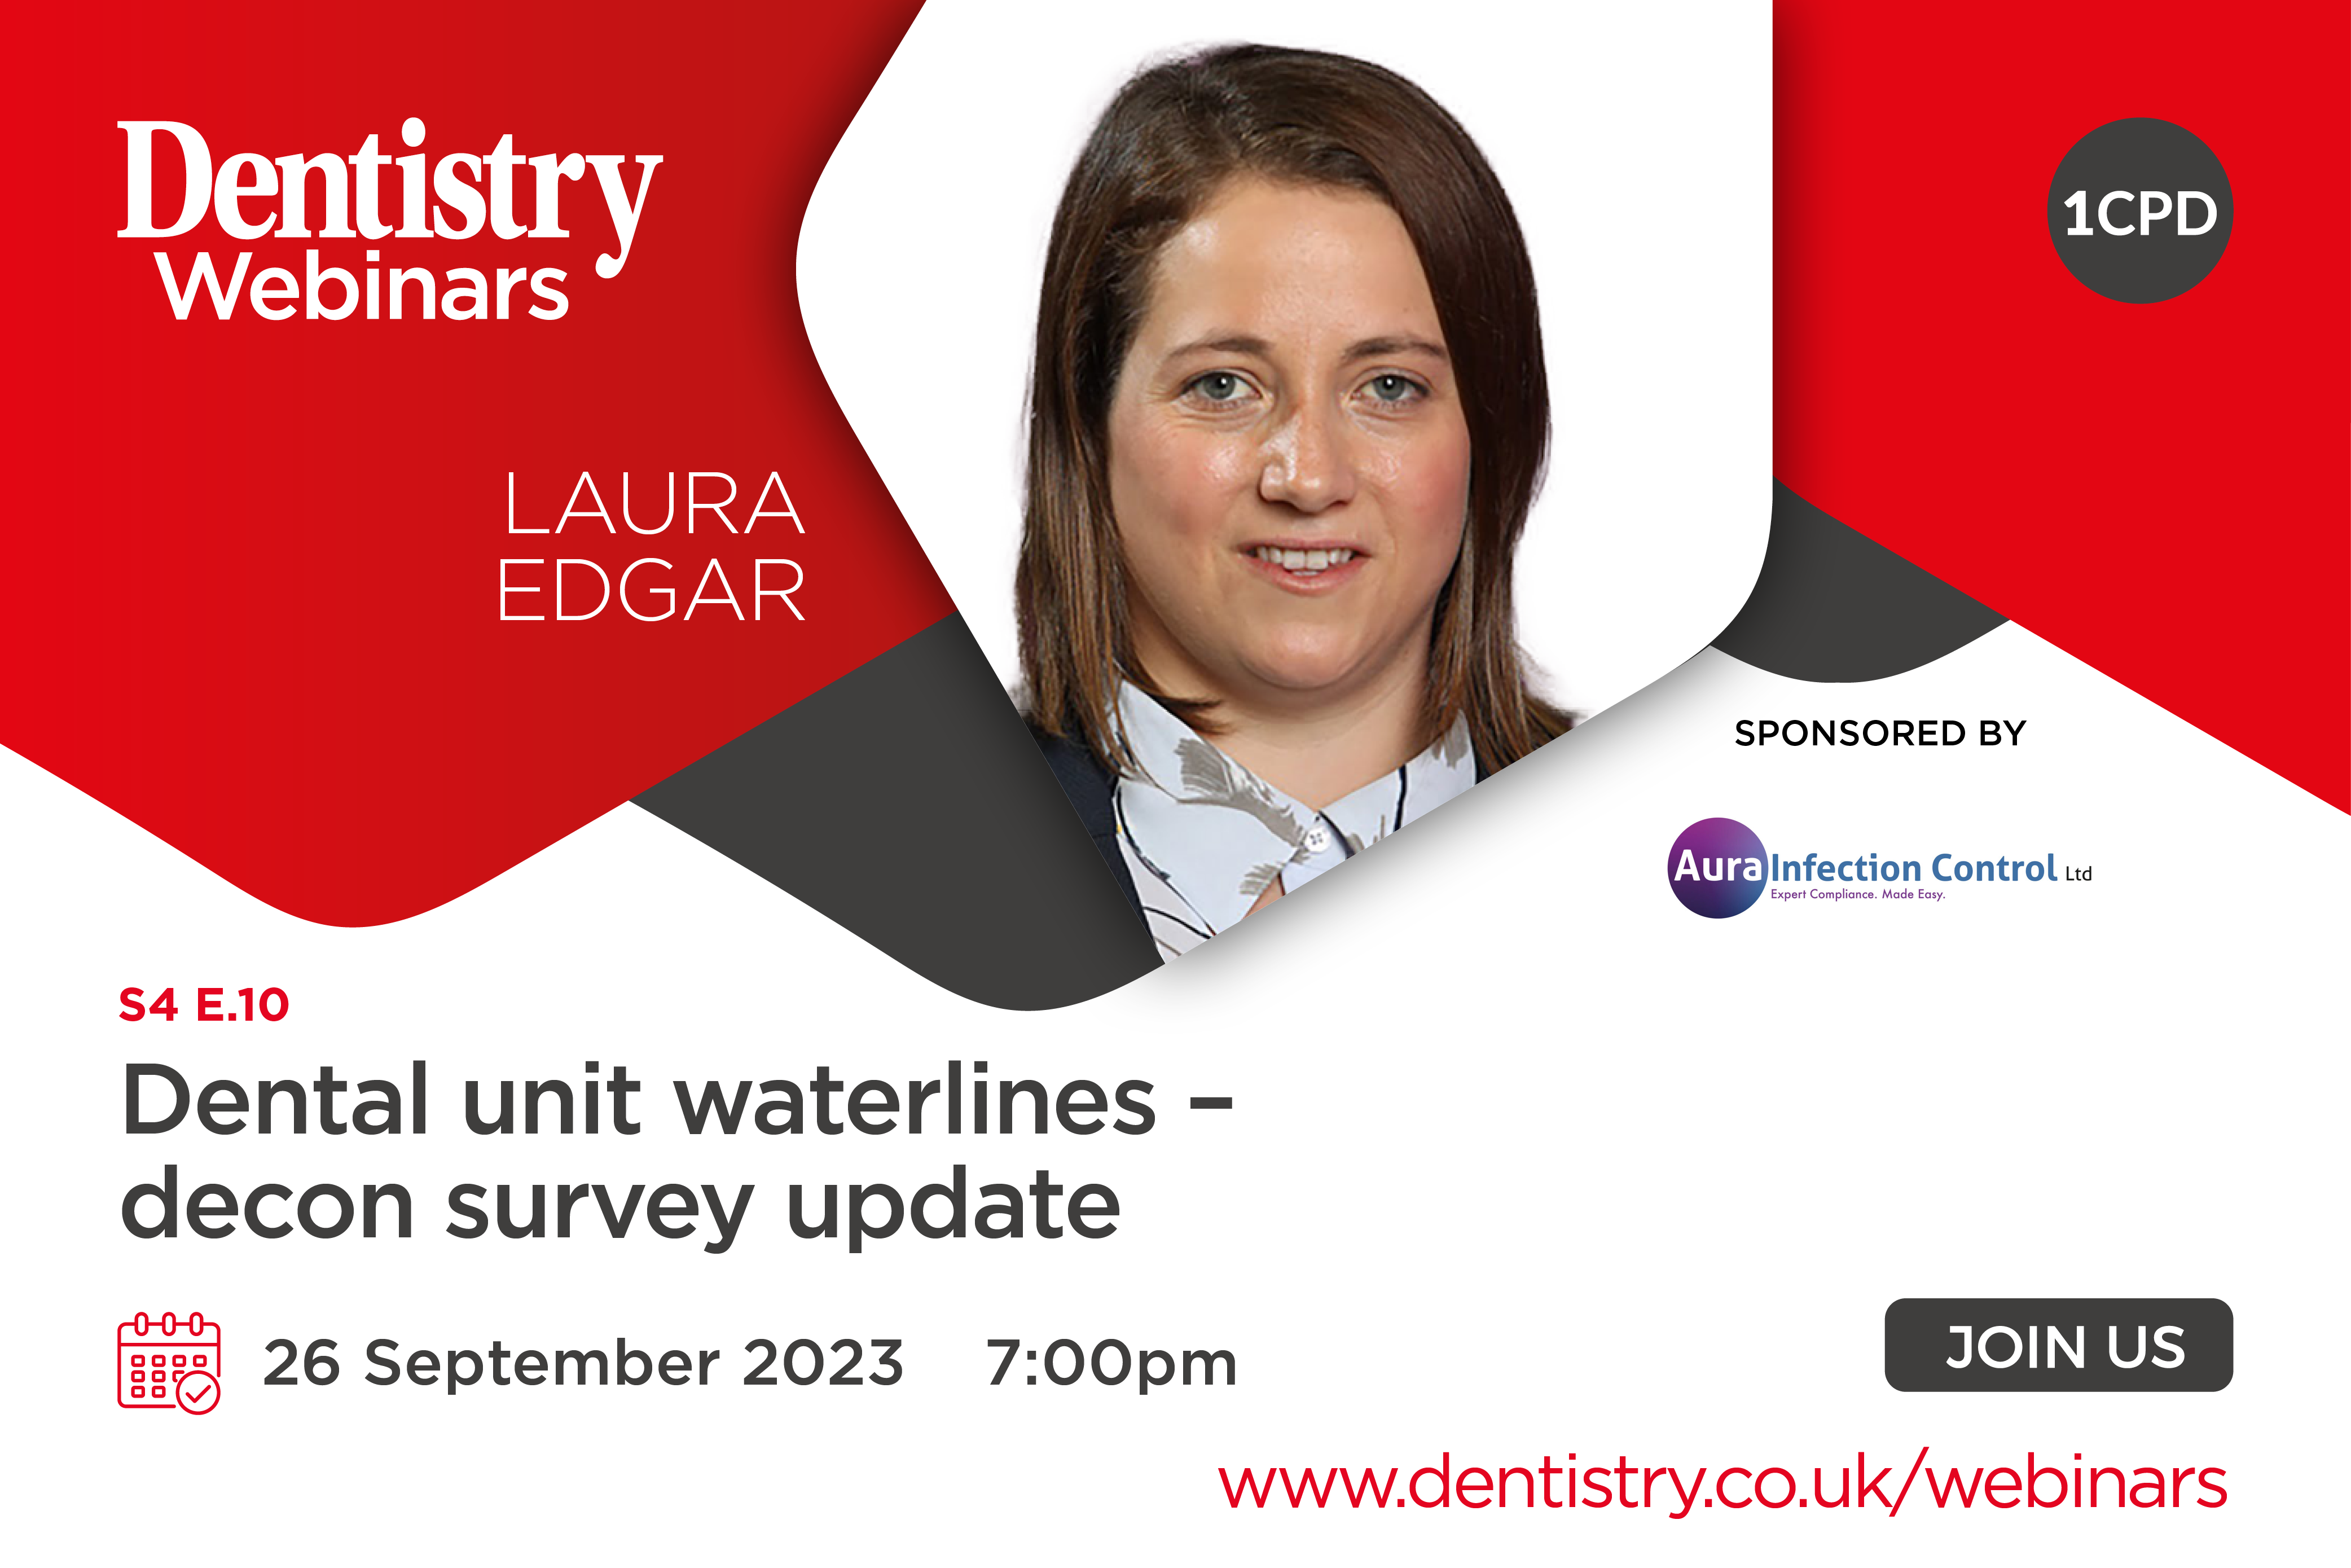 Join Laura Edgar on Tuesday 26 September at 7pm as she discusses dental unit waterline treatment and management. 